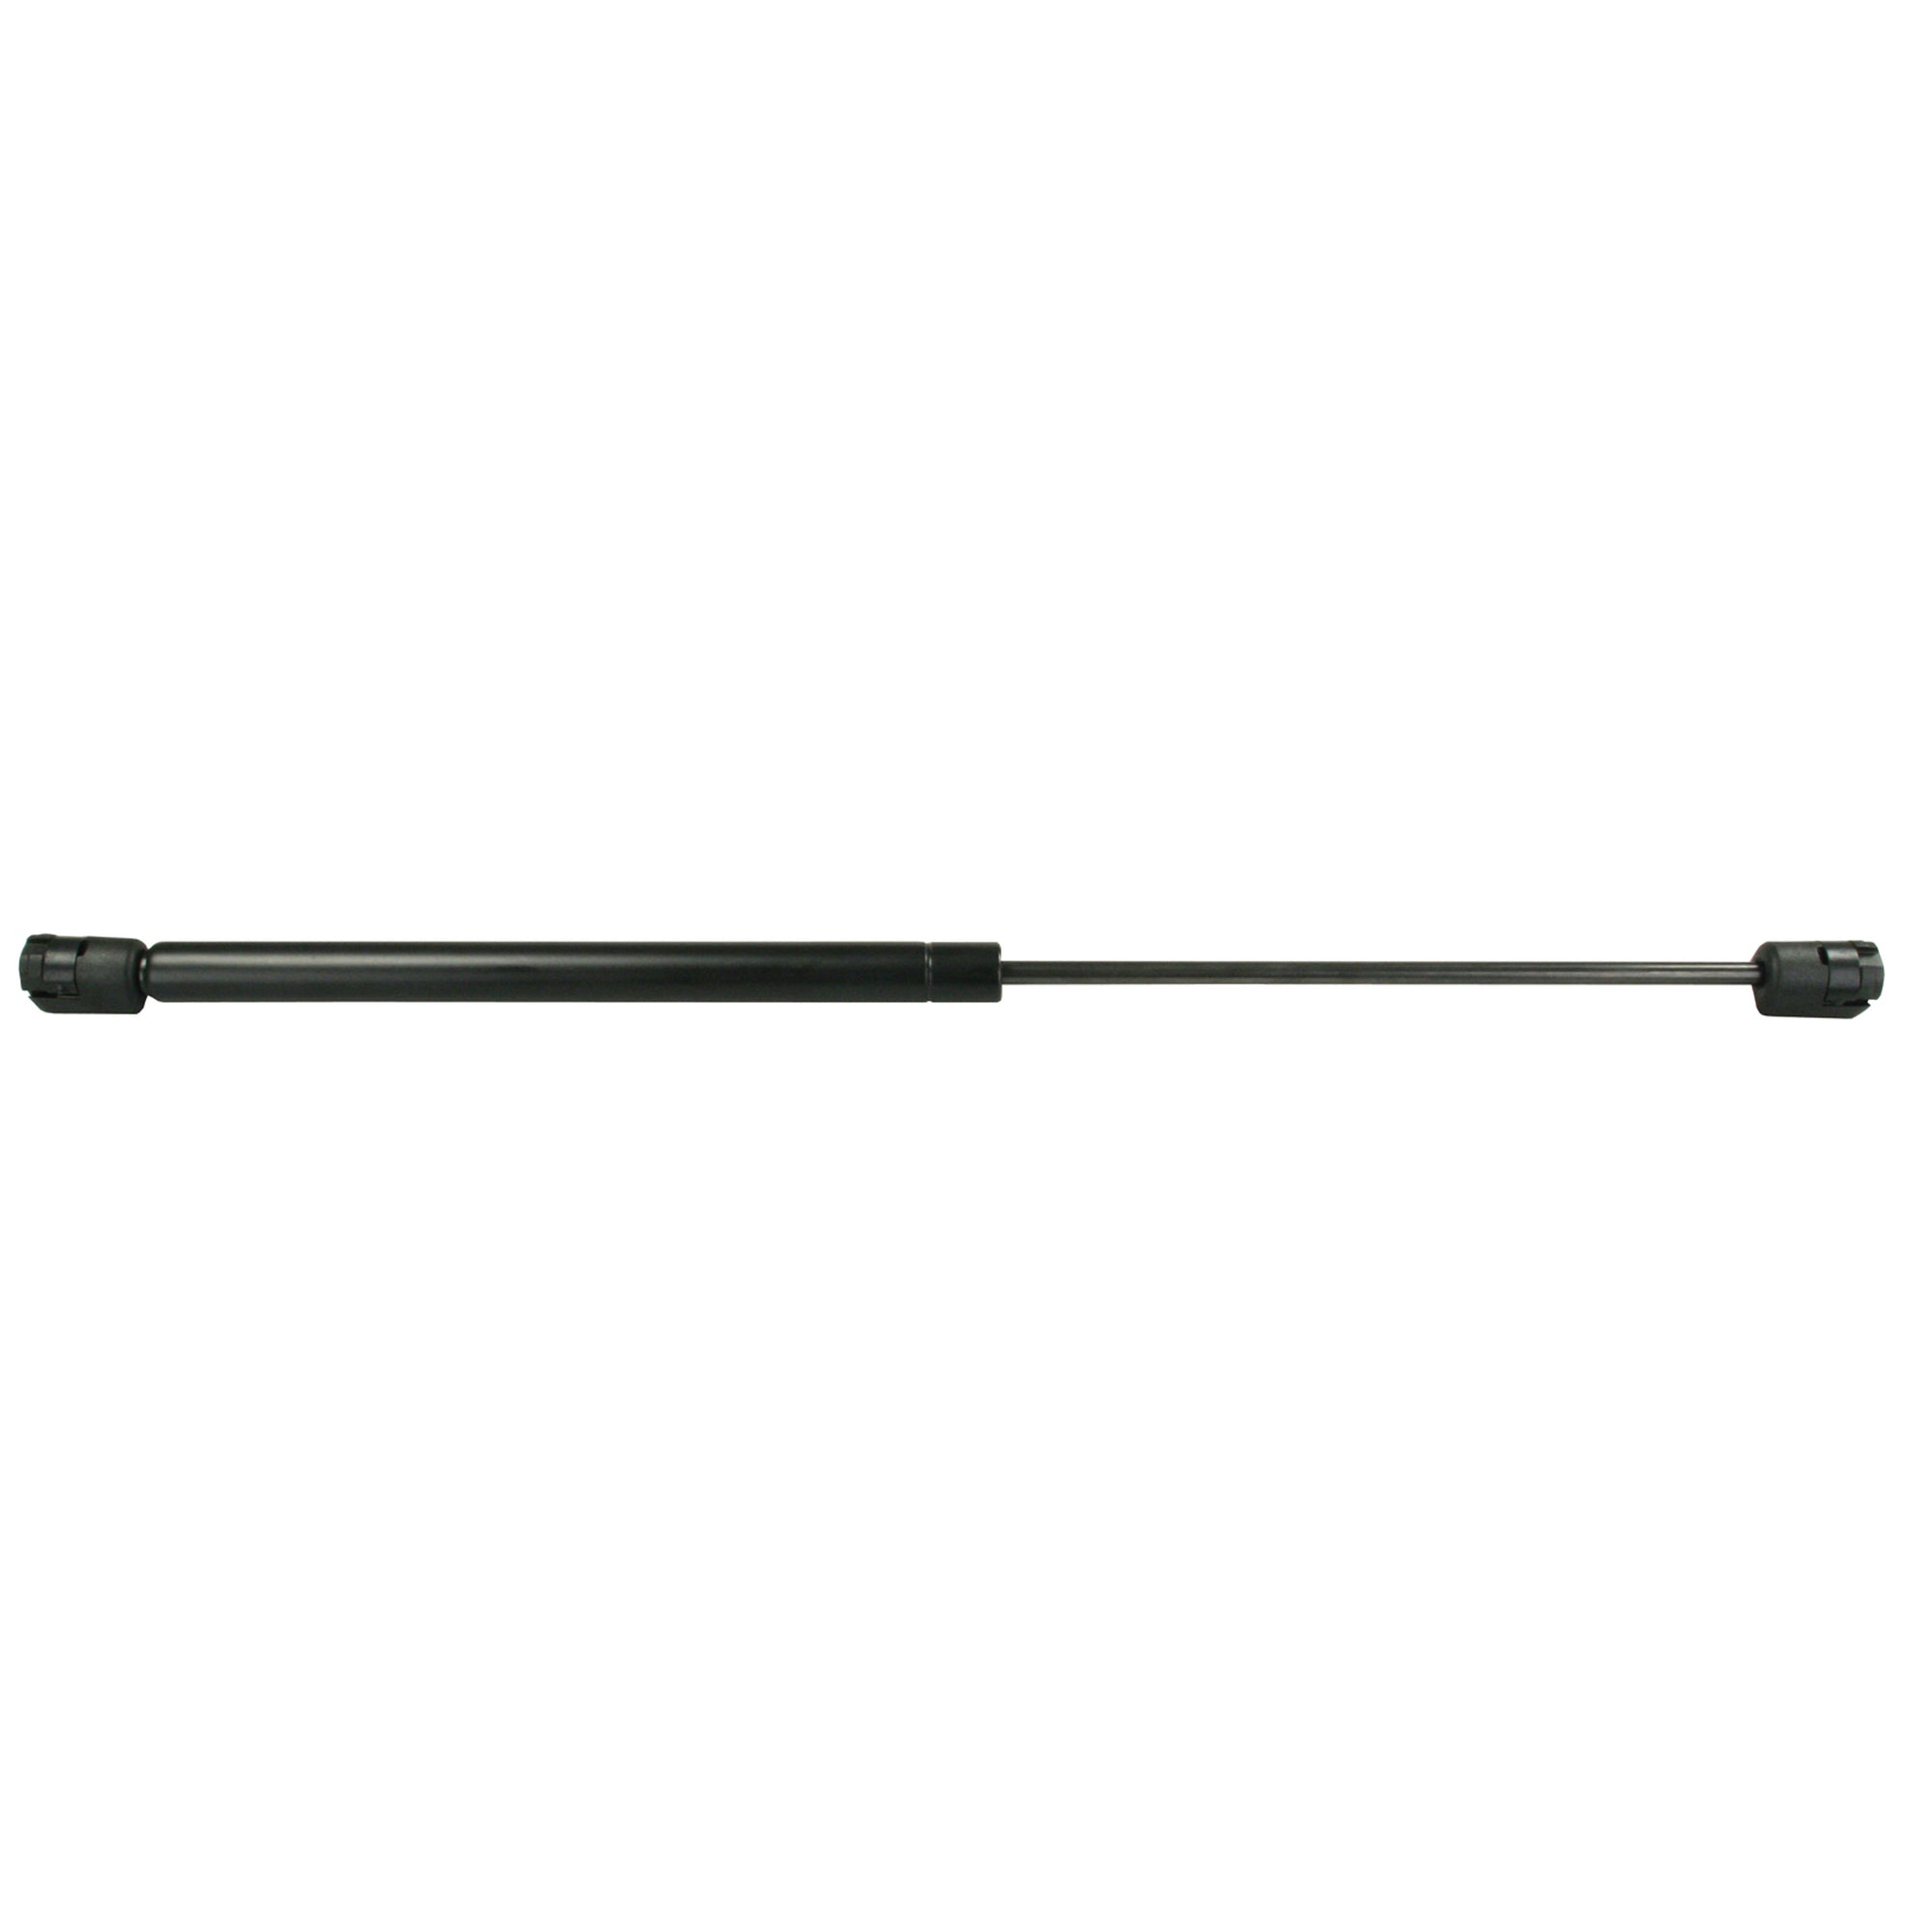 JR Products GSNI-5150-20 Gas Spring